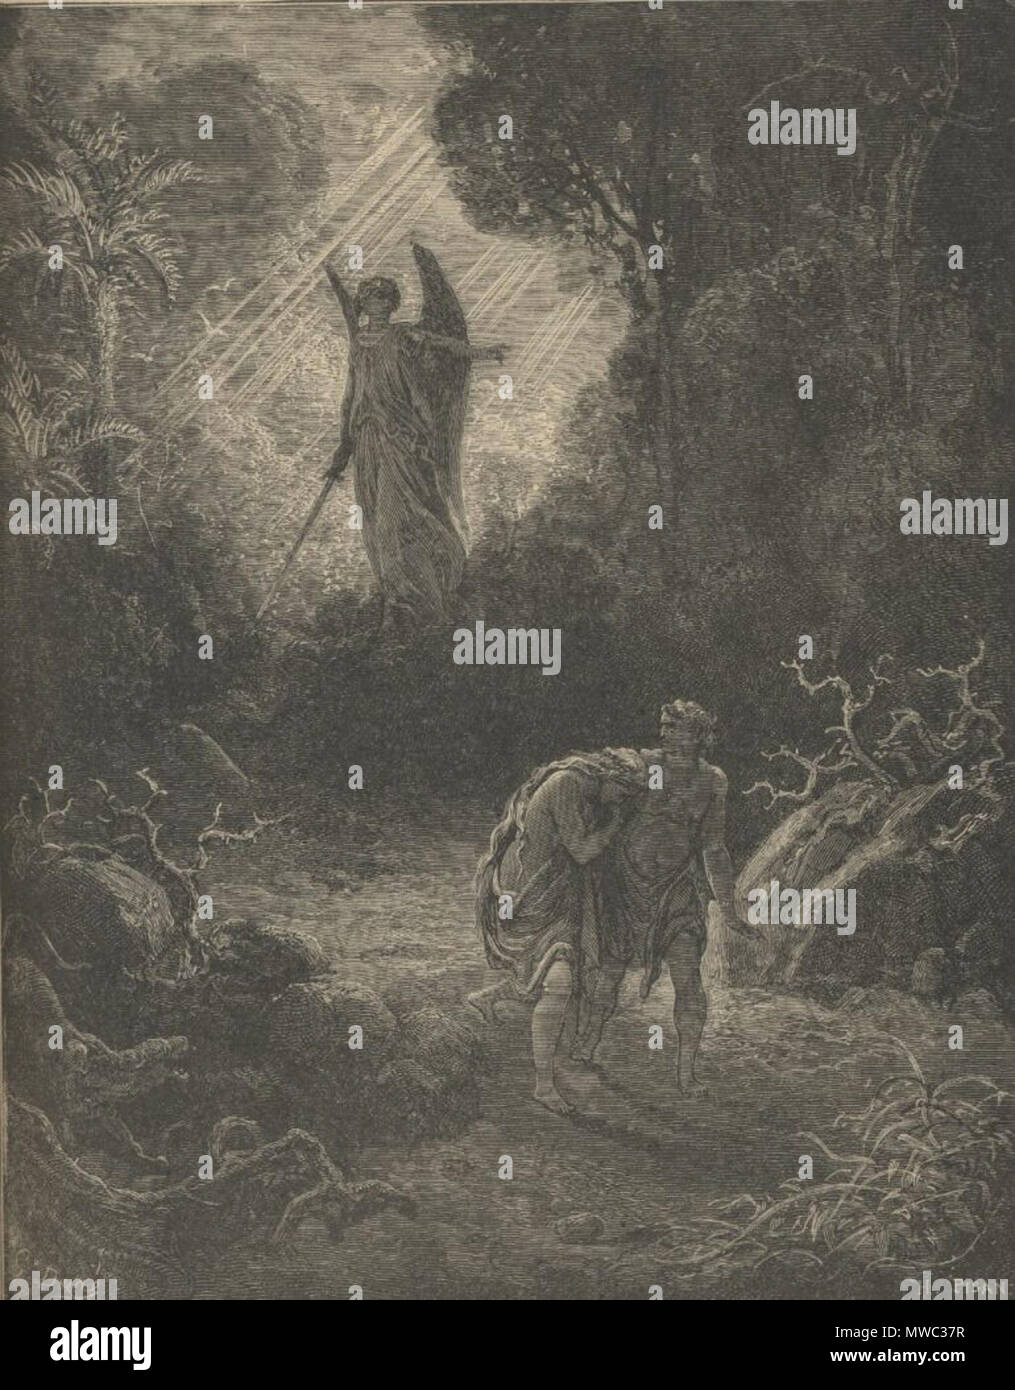 . English: Illustration by Gustave Dore. 24 February 2016. Gustave Dore ...